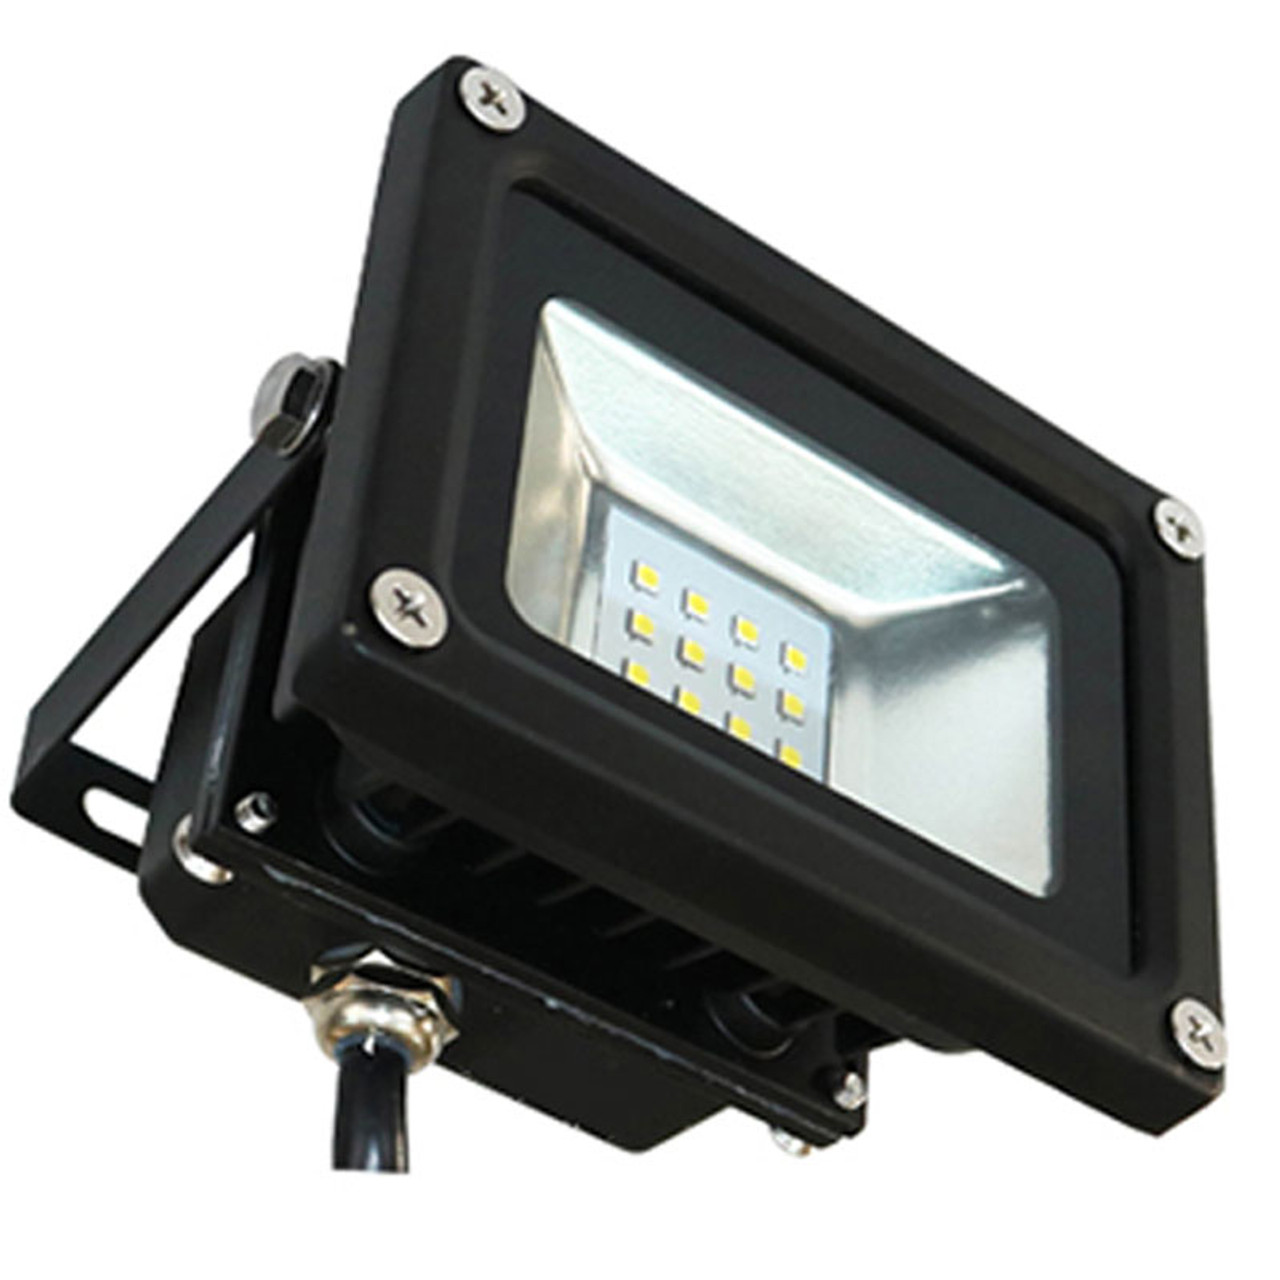 Details about   10W-1000W LED Flood Light Outside Wall Light Garden Outdoor Security Flood Light 